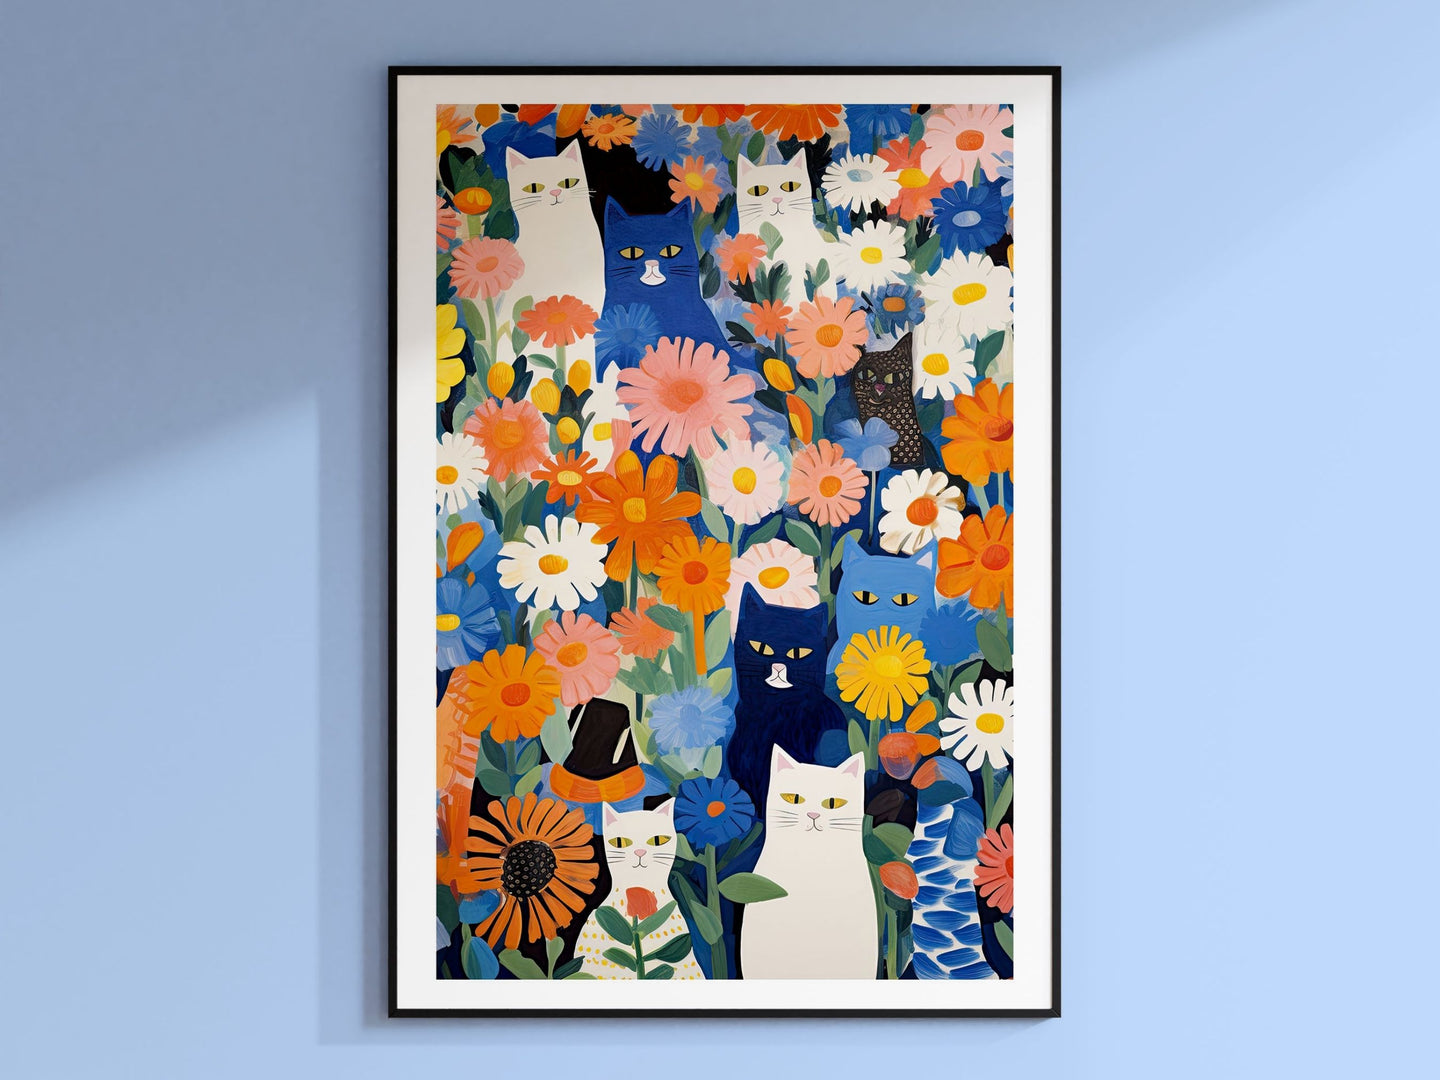 Cat in Garden, Flowers and Cats, Blue Wall Art, Flower Art Print, Cat Art Print, Cat Illustration, Floral Wall Decor, Gifts for Cat Lovers